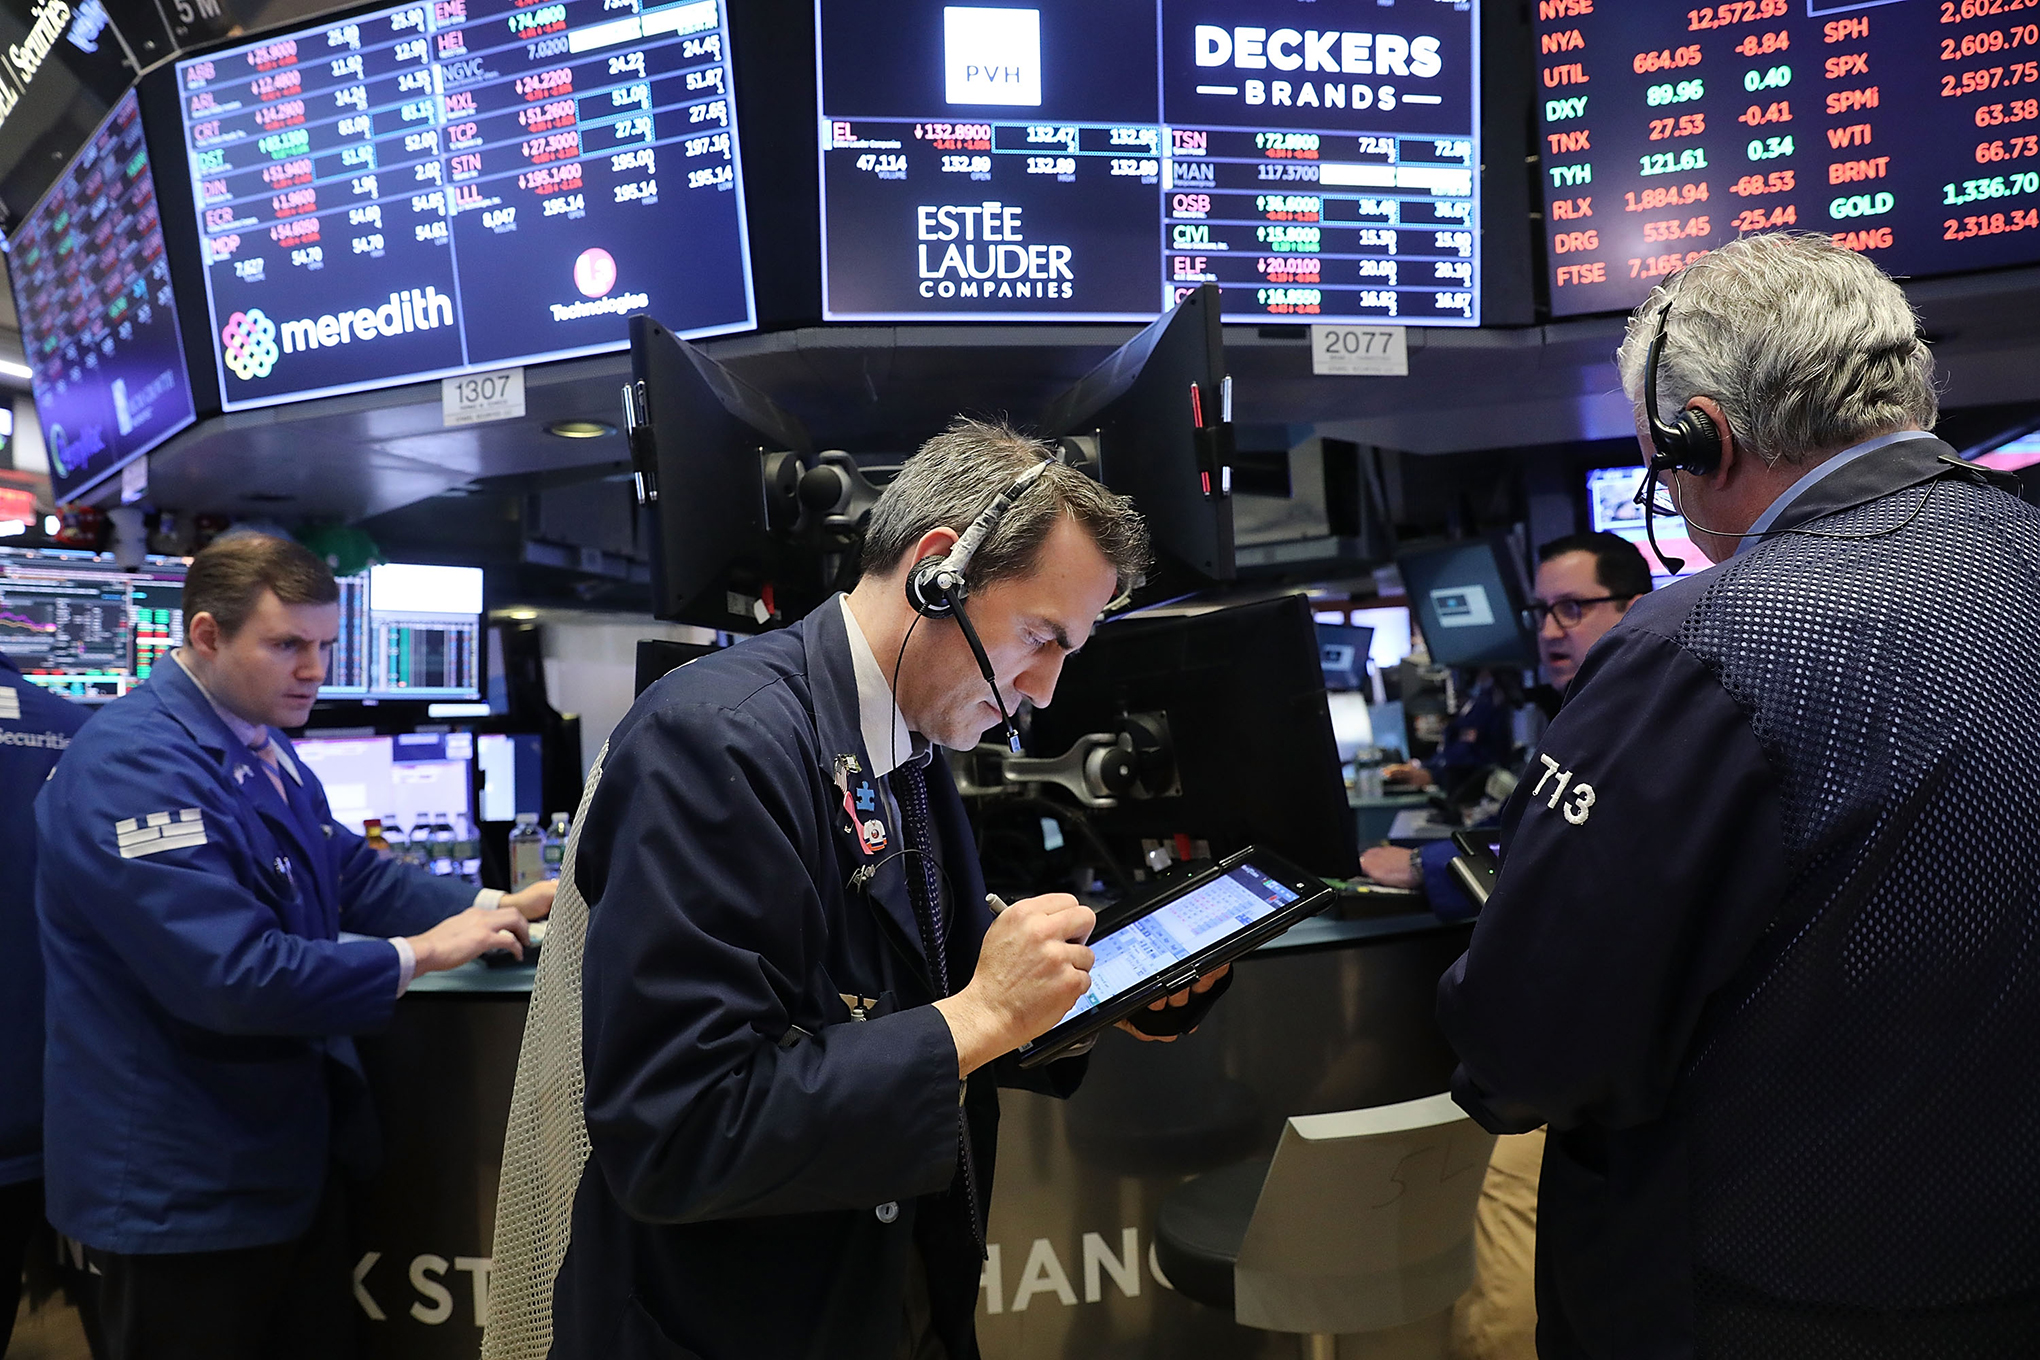 Traders work on the floor of the New York Stock Exchange (NYSE) on Feb. 6, 2018 in New York.